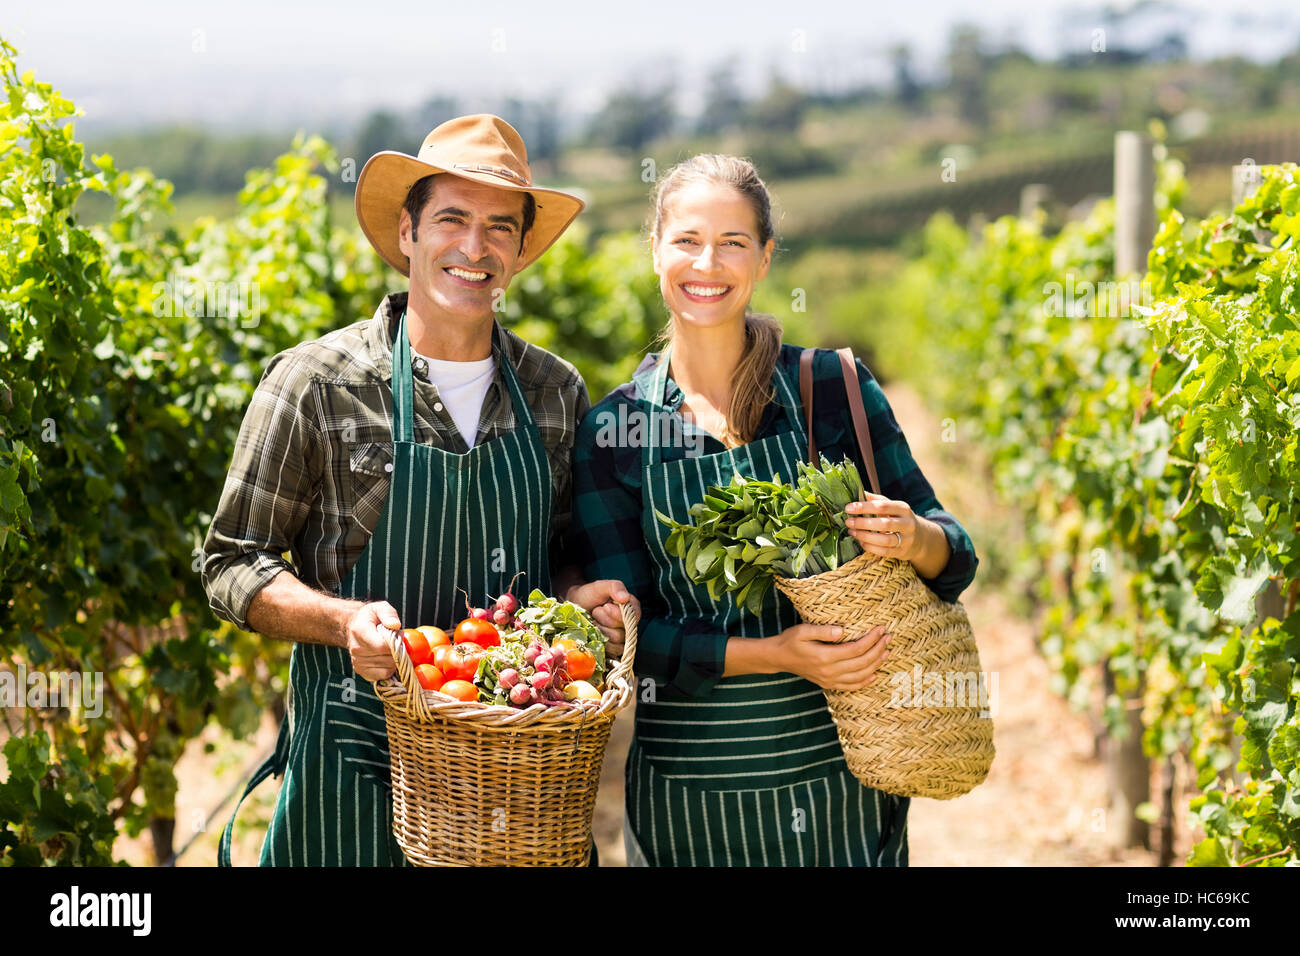 Portrait of happy farmer couple holding baskets of vegetables Stock Photo